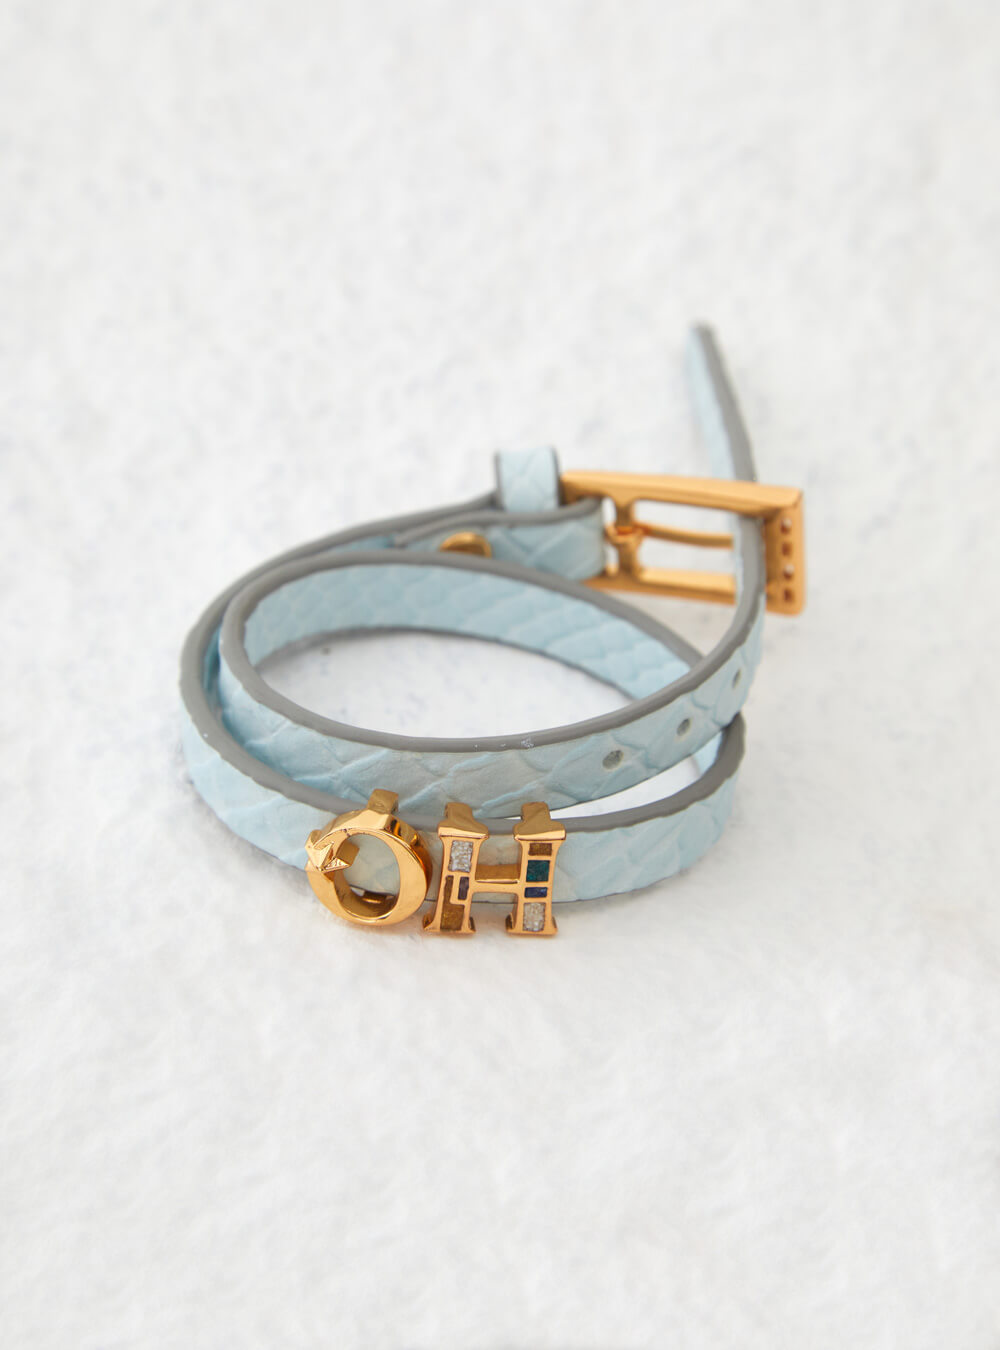 Outhouse - OH Series The Oh Monogram, Cobalt Blue Double Wrap Leather  Bracelet